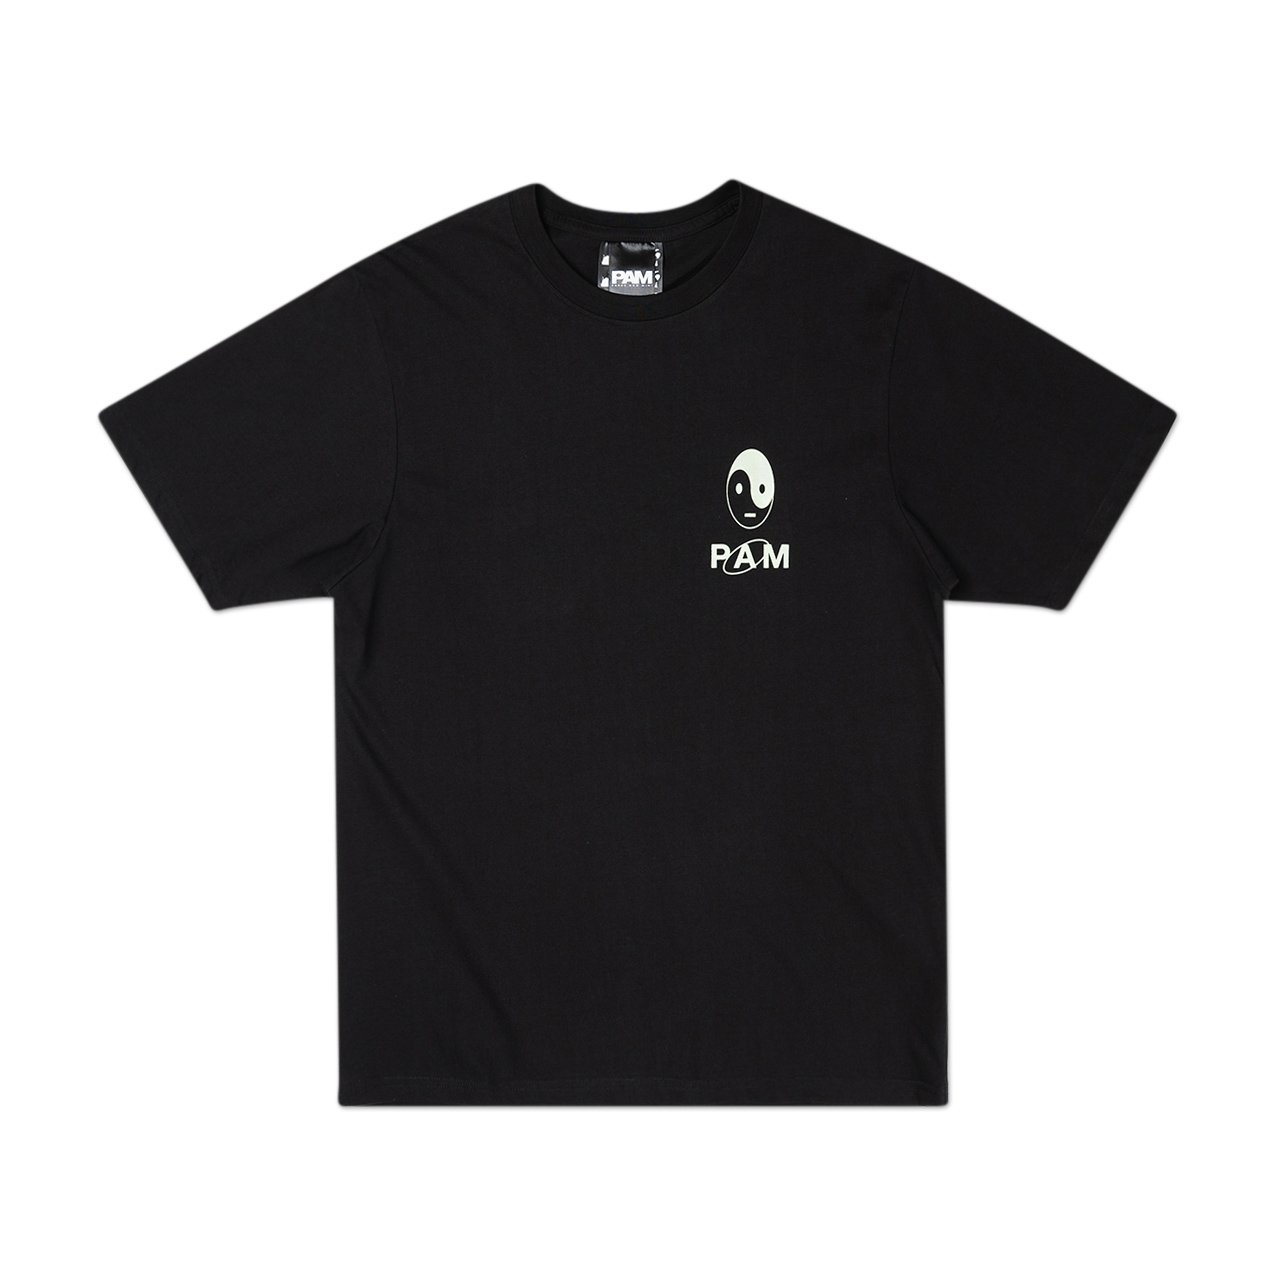 perks and mini deeper meaning s/s t-shirt (black) - 1390/e-b - a.plus - Image - 1